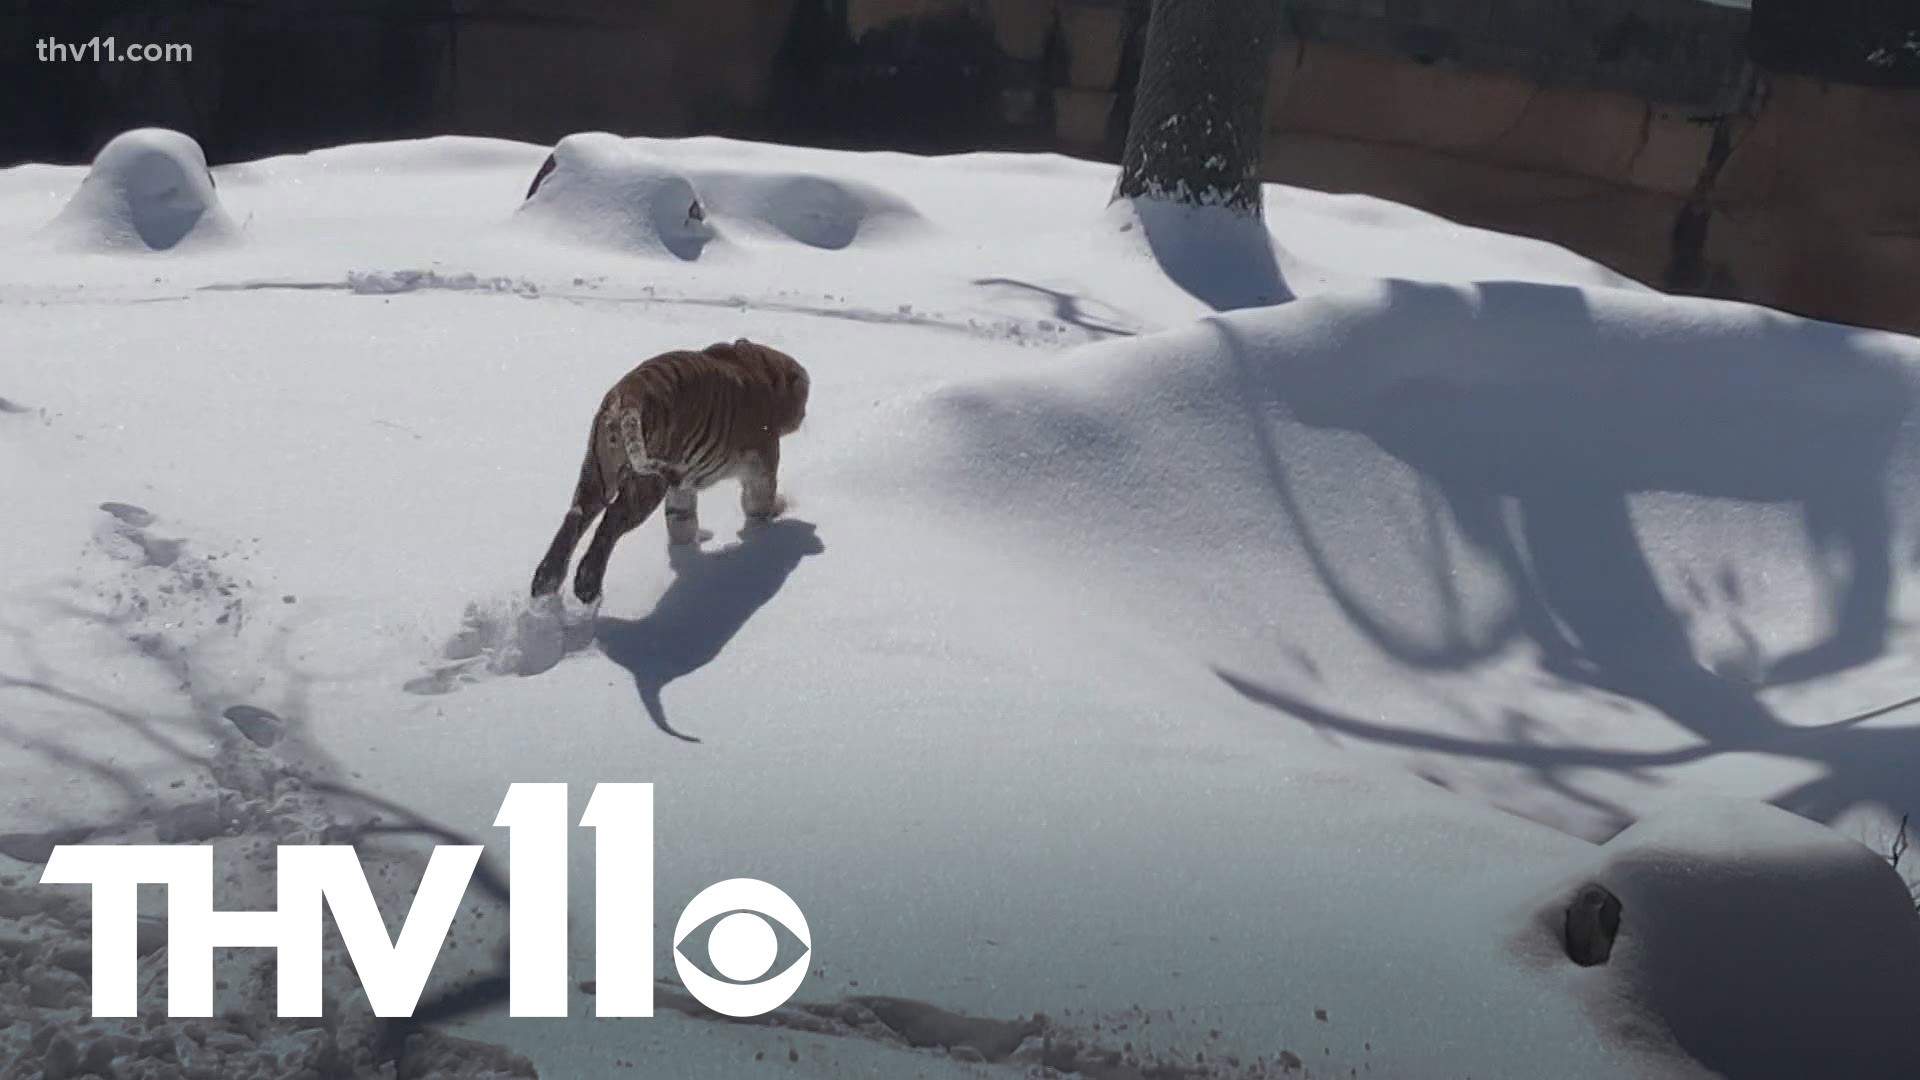 Liku the Tiger was taking advantage of the snow day at the Little Rock Zoo!